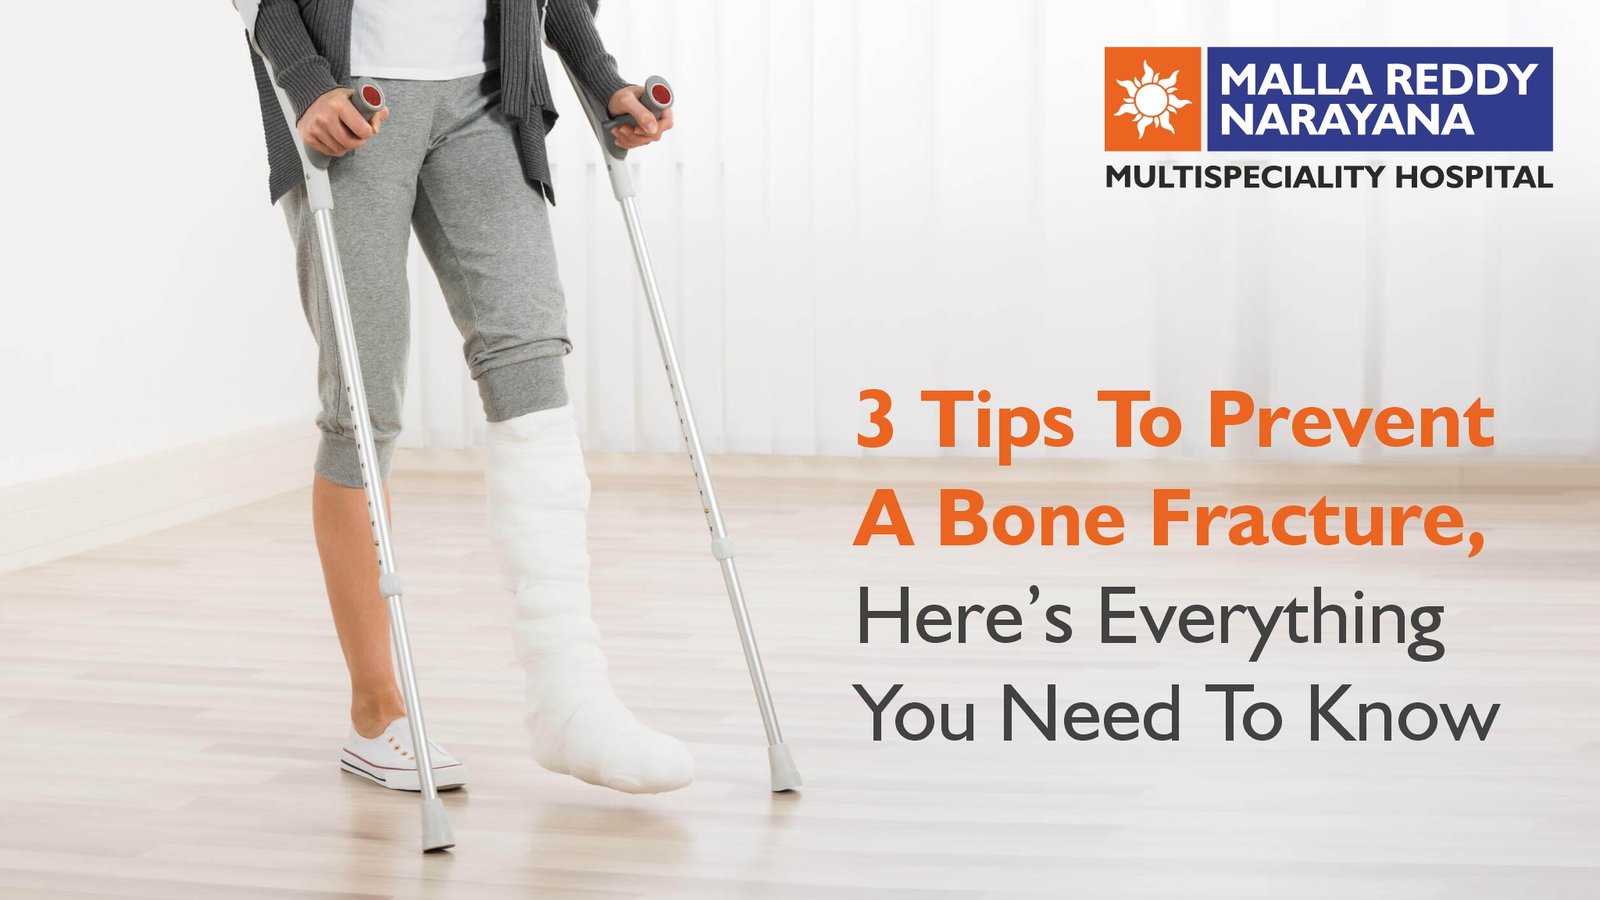 3 Tips To Prevent A Bone Fracture, Here's Everything You Need To Know